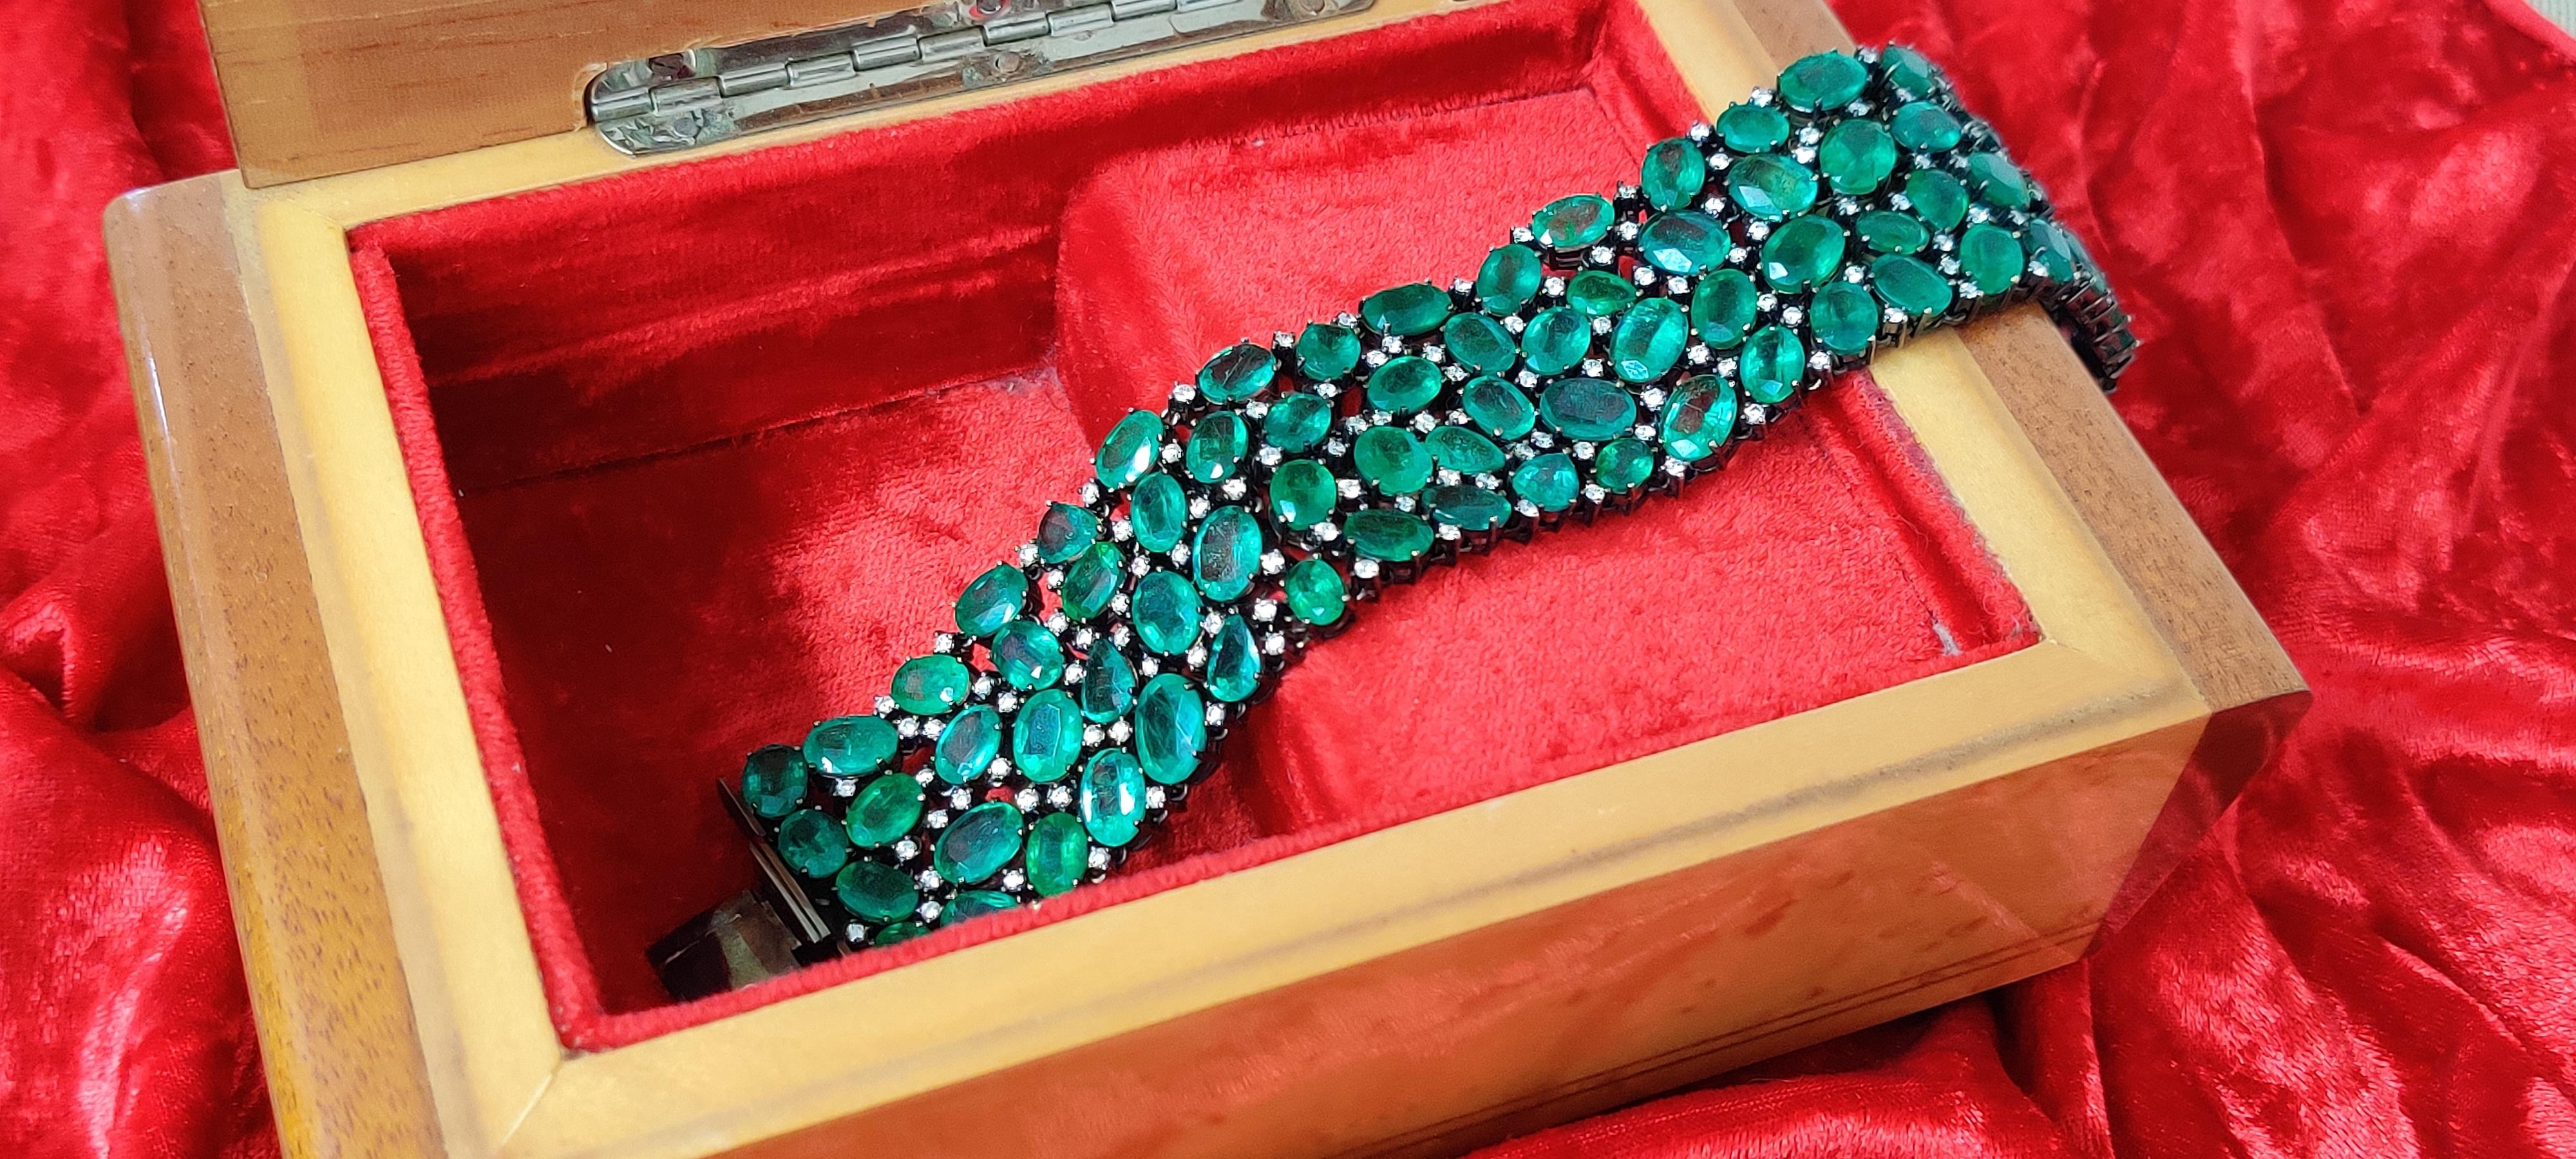 115.21 Ct Zambian Emerald studded Contemporary Statement Bracelet in 18K Gold For Sale 2